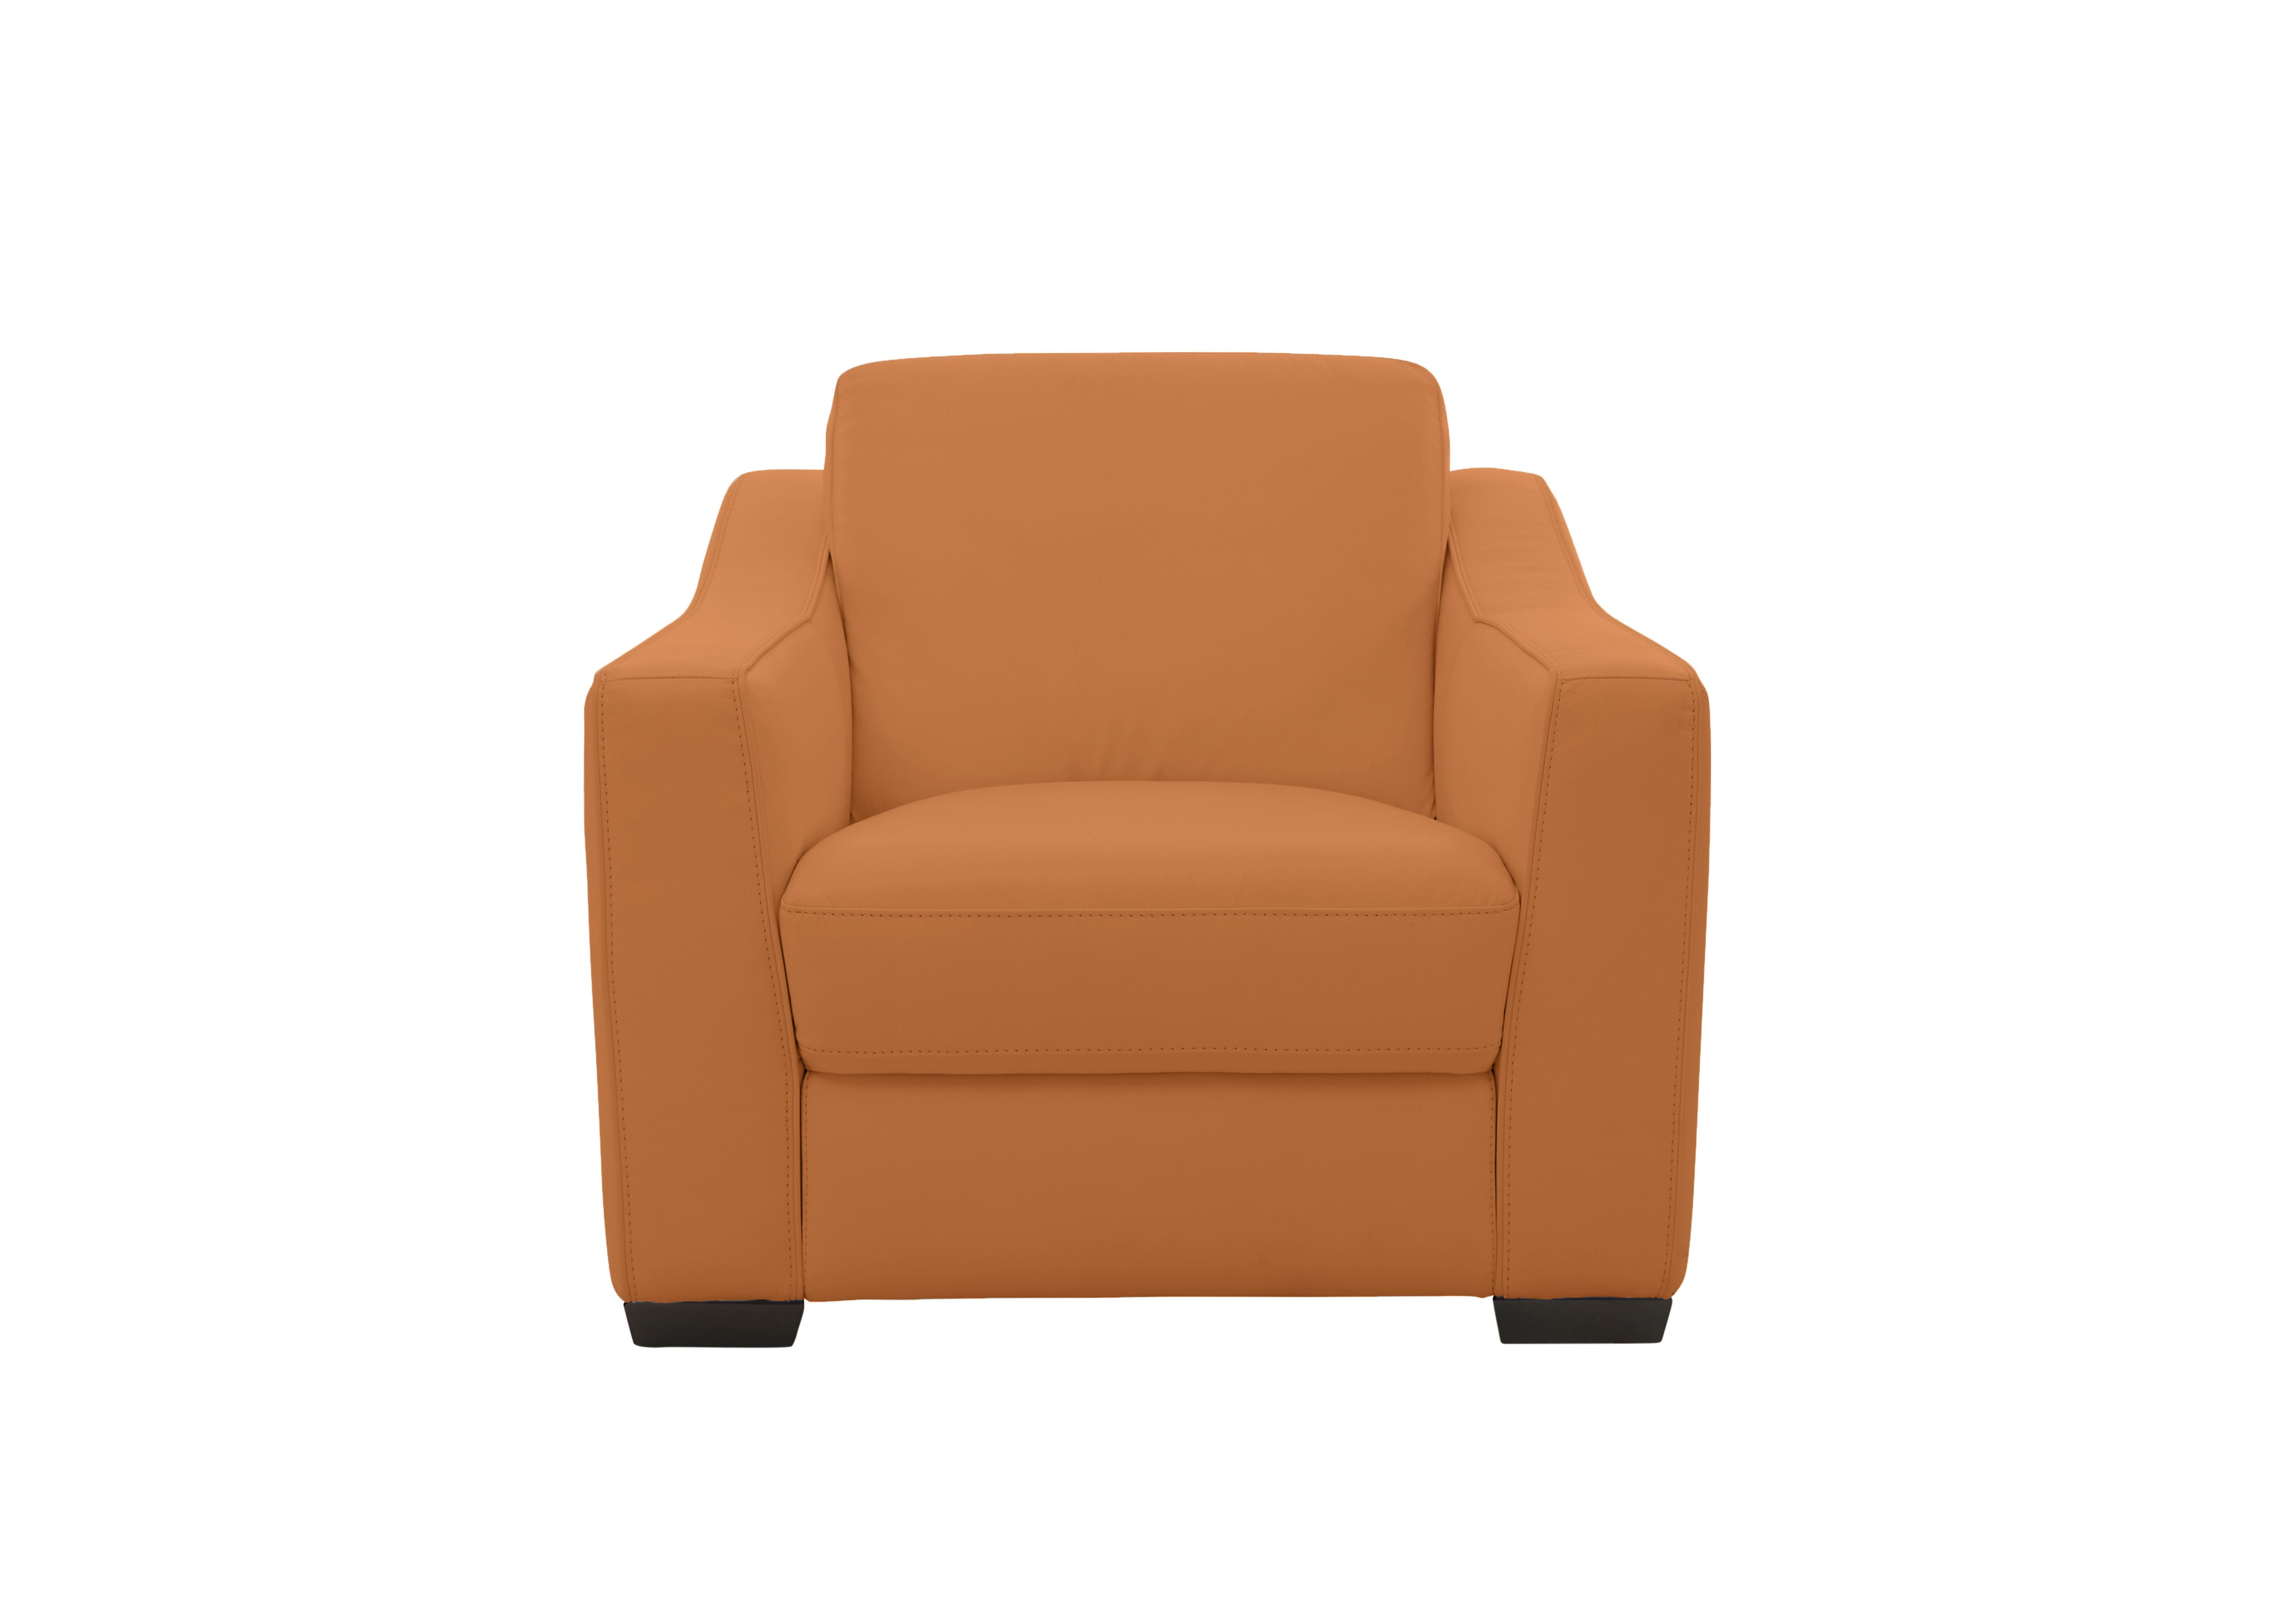 Optimus Leather Armchair in Bv-335e Honey Yellow on Furniture Village